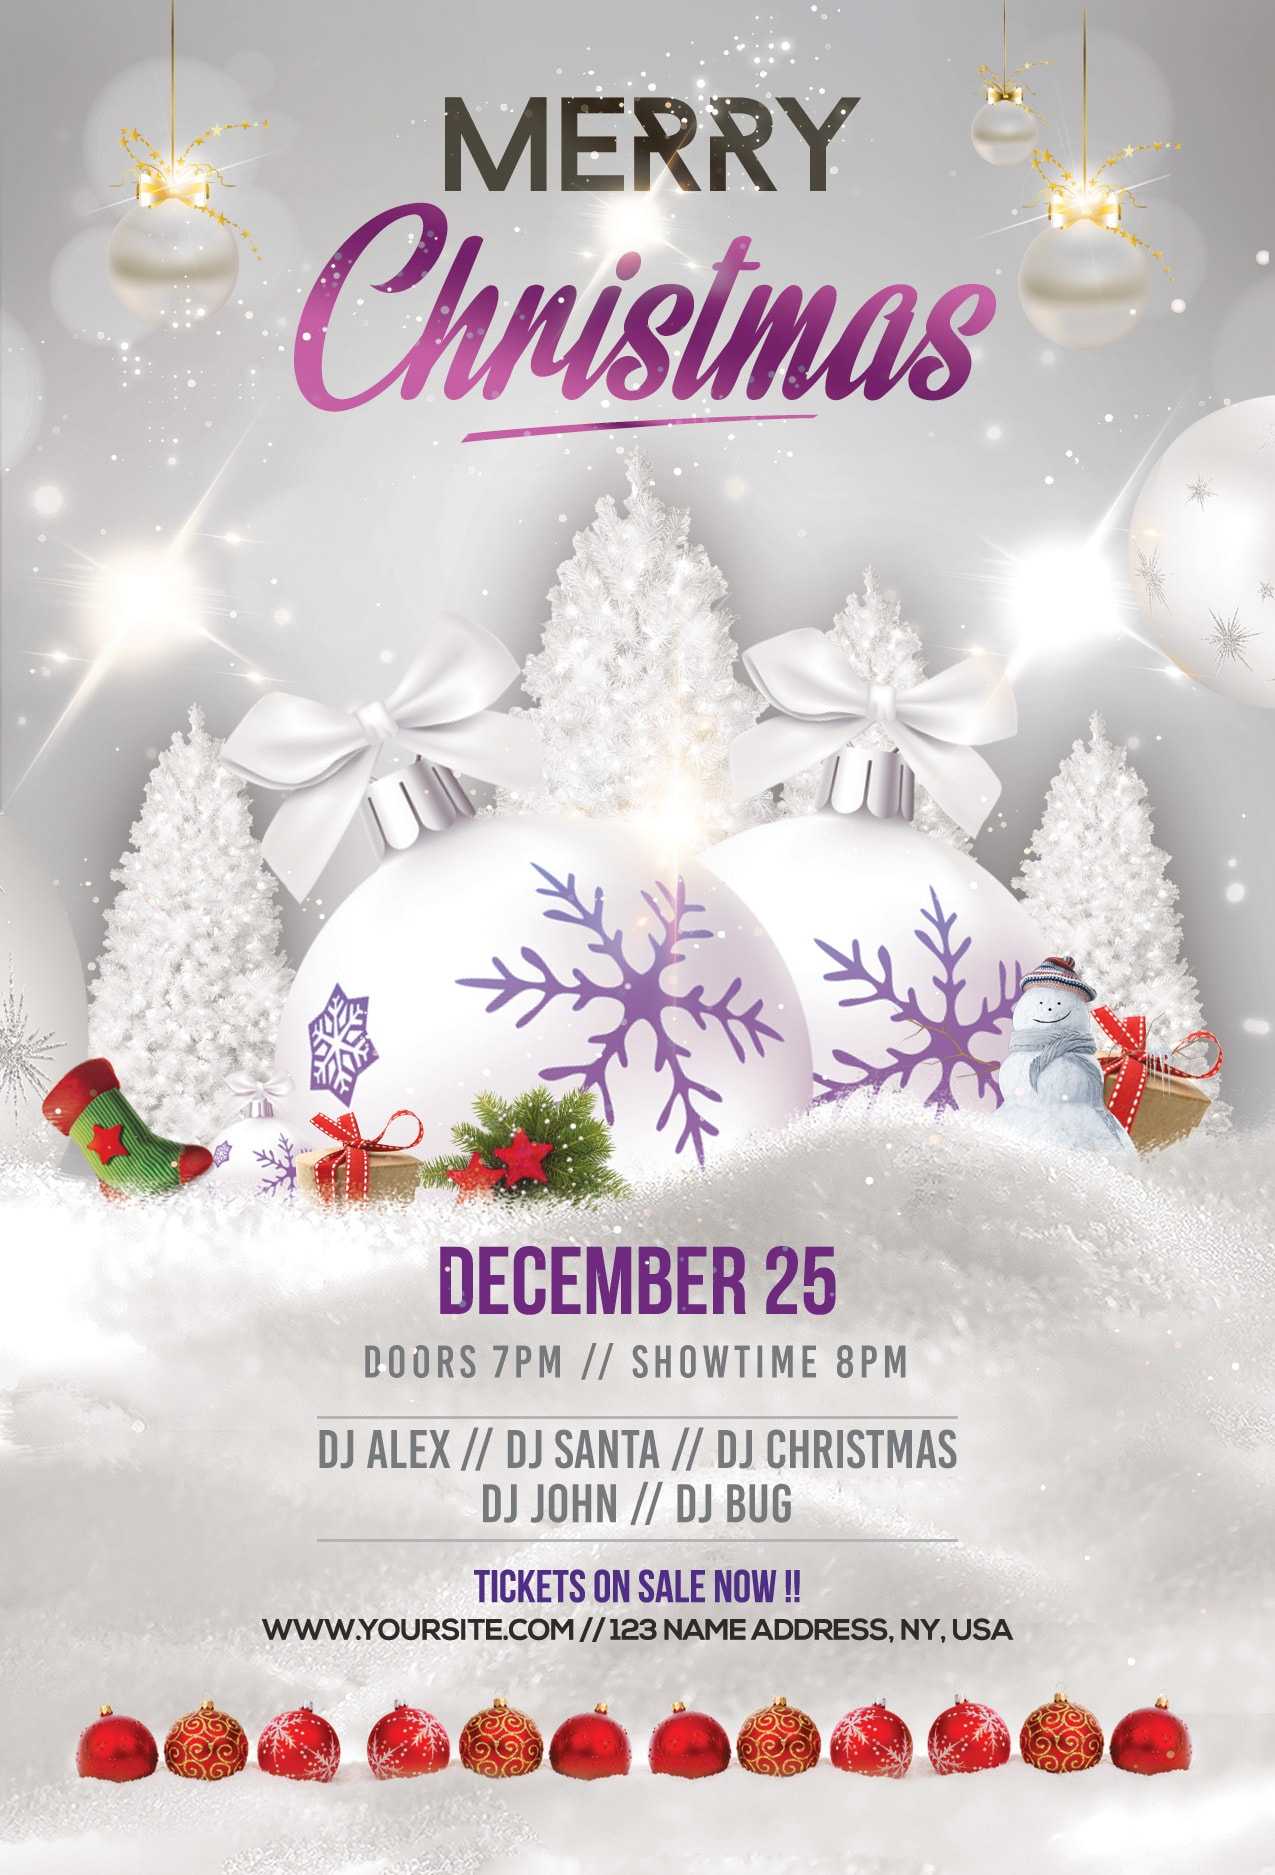 Merry Christmas & Holiday Free Psd Flyer Template - Stockpsd In Christmas Brochure Templates Free